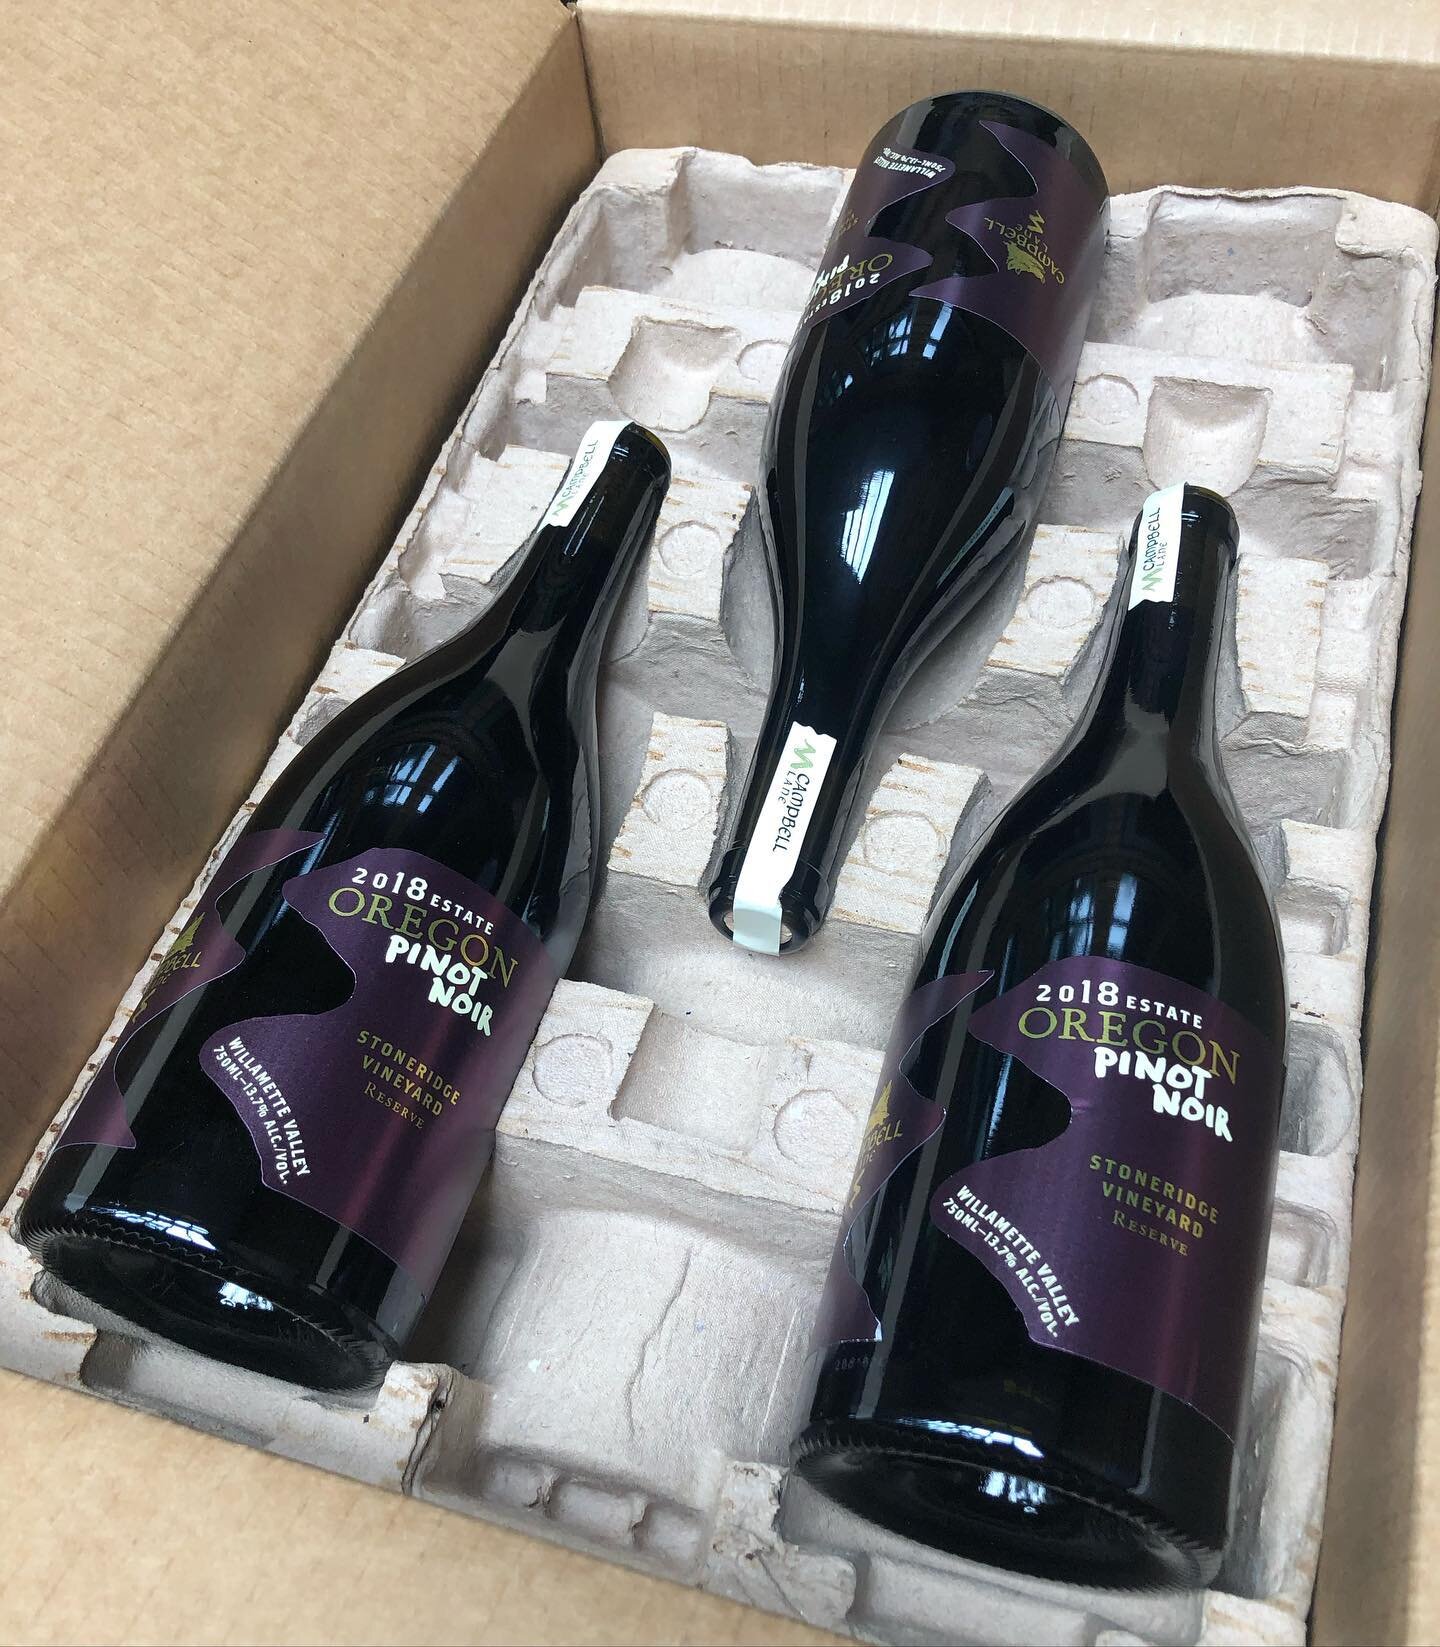 Special delivery! We ship to 38 states and Washington DC. So the only question is, Pinot Noir, Gris, or Ros&eacute;? All three are a good option.